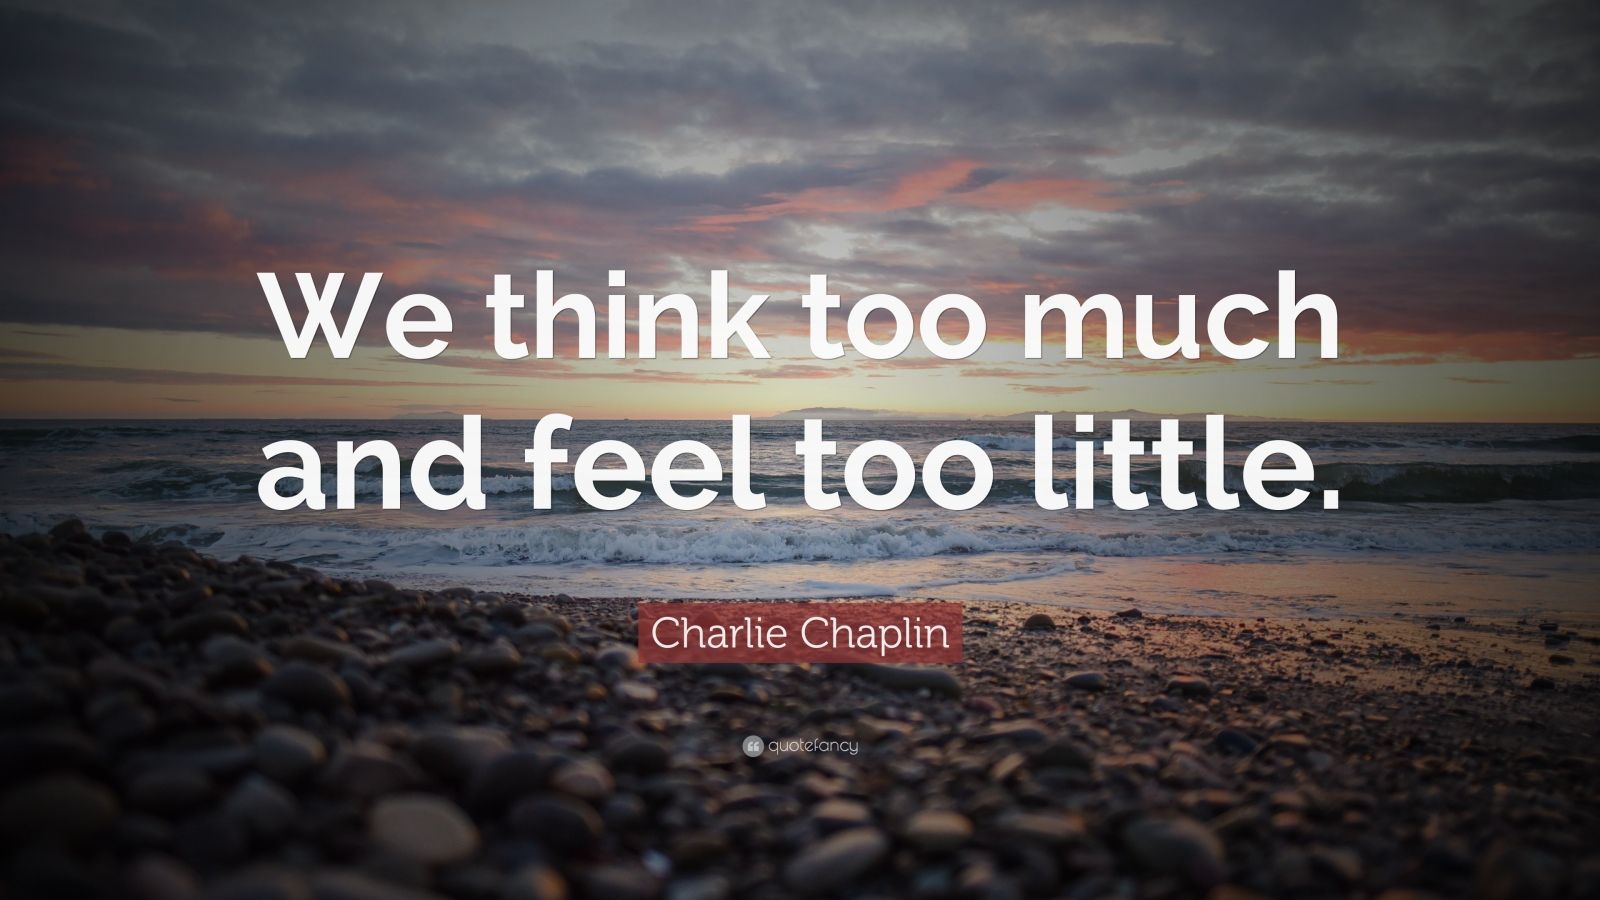 22710 Charlie Chaplin Quote We think too much and feel too little